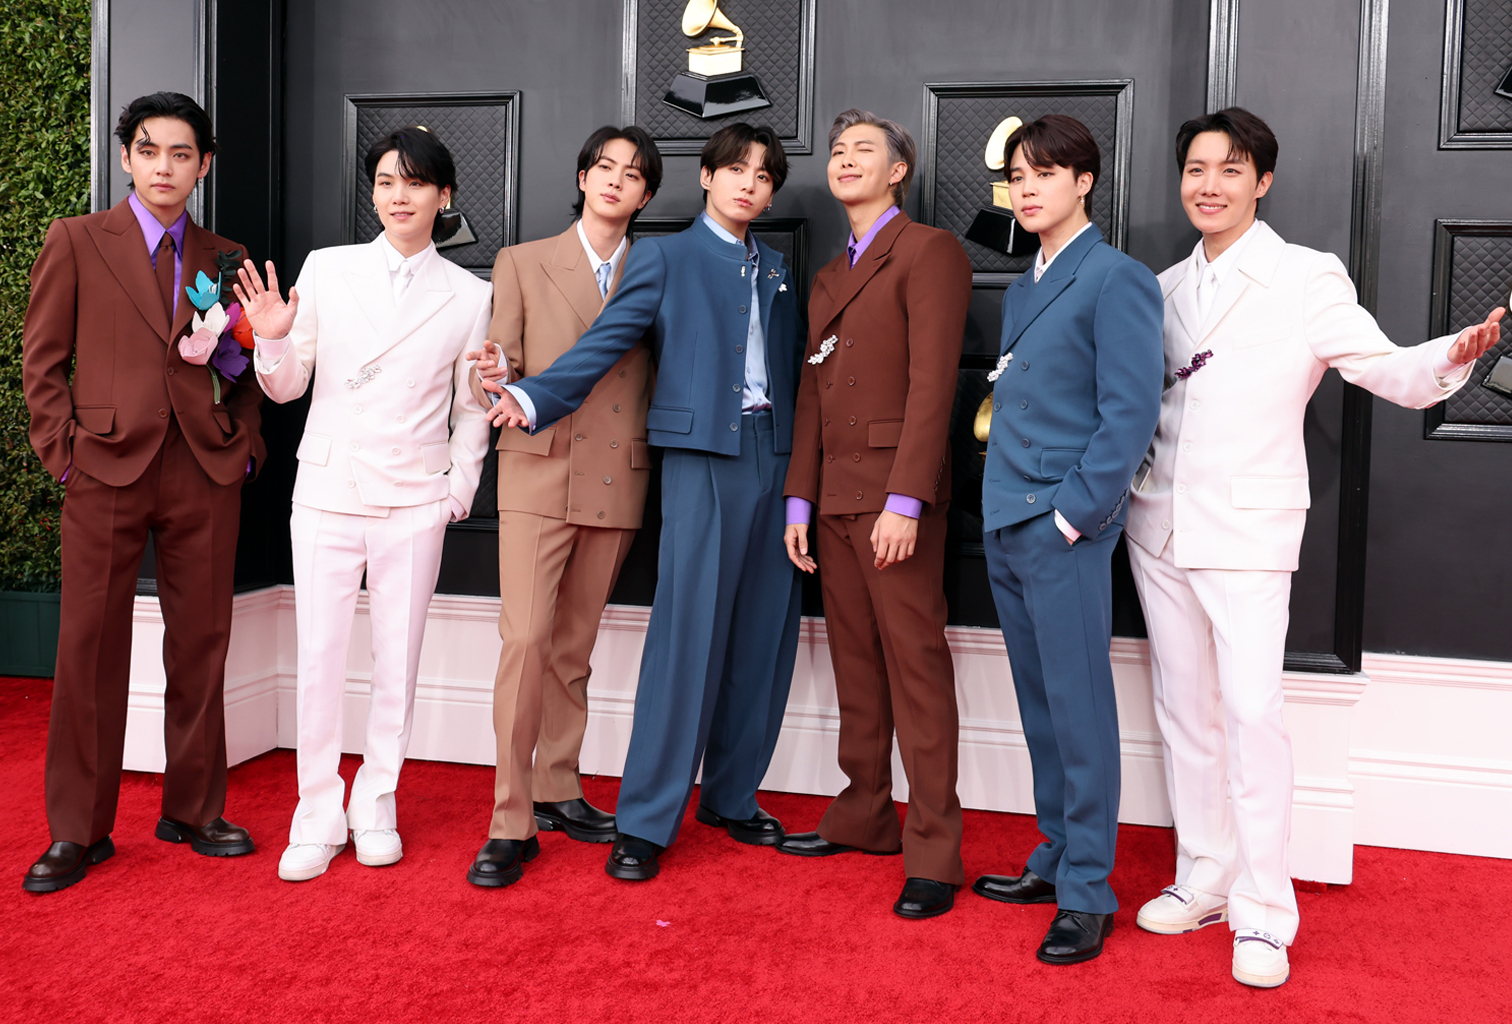 Will 2022 Be BTS' and K-Pop's Year at the Grammy Awards?